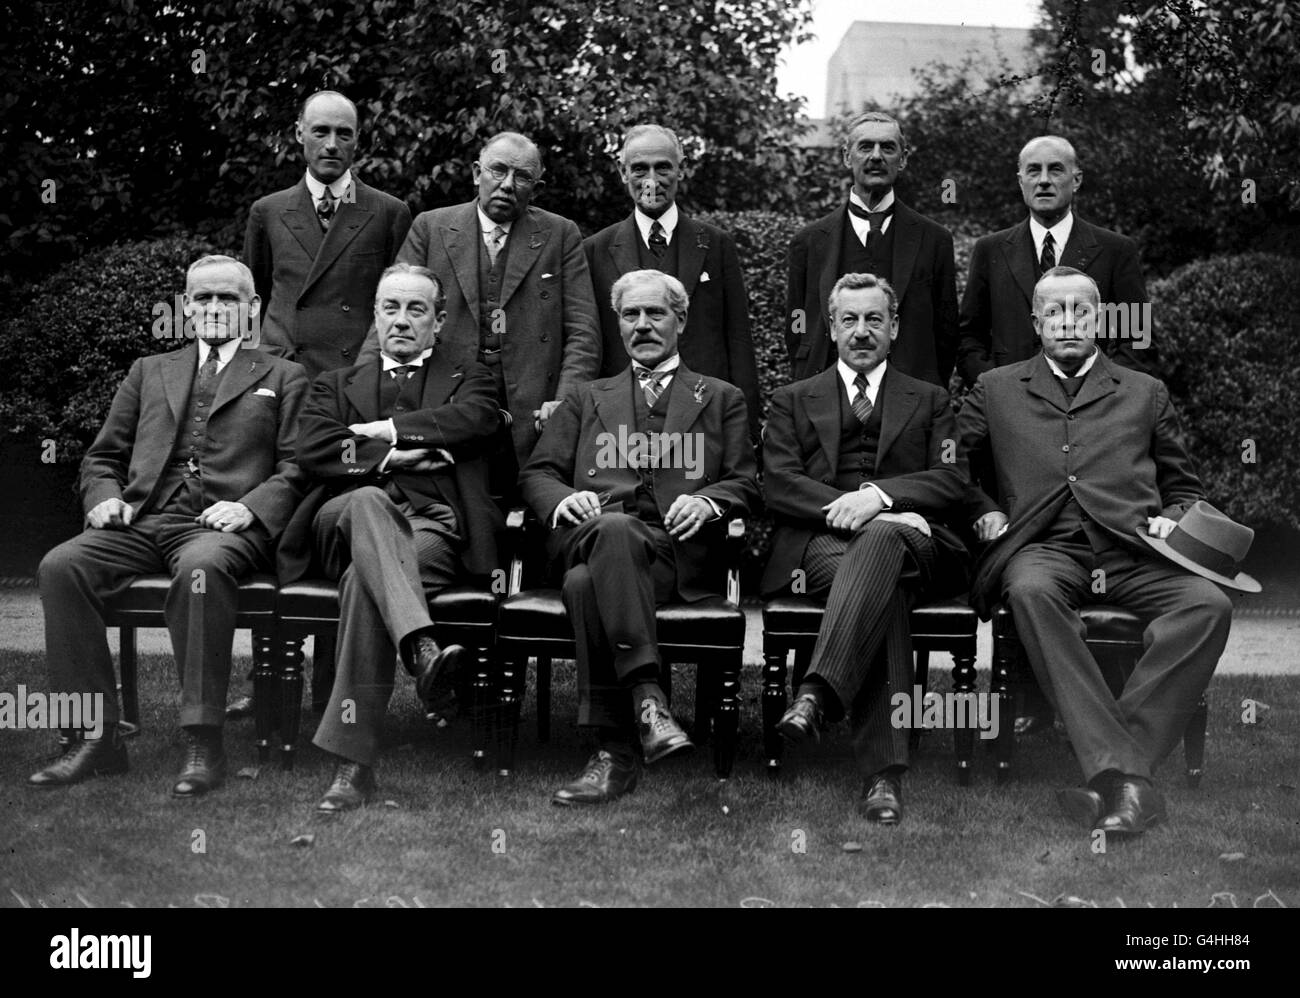 PA NEWS PHOTO 31/8/31 A LIBRARY FILE OF THE GROUP OF THE NEW CABINET PHOTOGRAPHED IN THE GARDEN OF NO.10 DOWNING STREET, LONDON. FROM LEFT TO RIGHT: R. MACDONALD, S. BALDWIN, P. SNOWDEN, SIR H. SAMUEL, LORD SANKEY, MARQUESS OF READING, SIR S. HOARE, J.H. THOMAS, NEVILLE CHAMBERLAIN AND SIR P. CUNLIFFE-LISTER Stock Photo